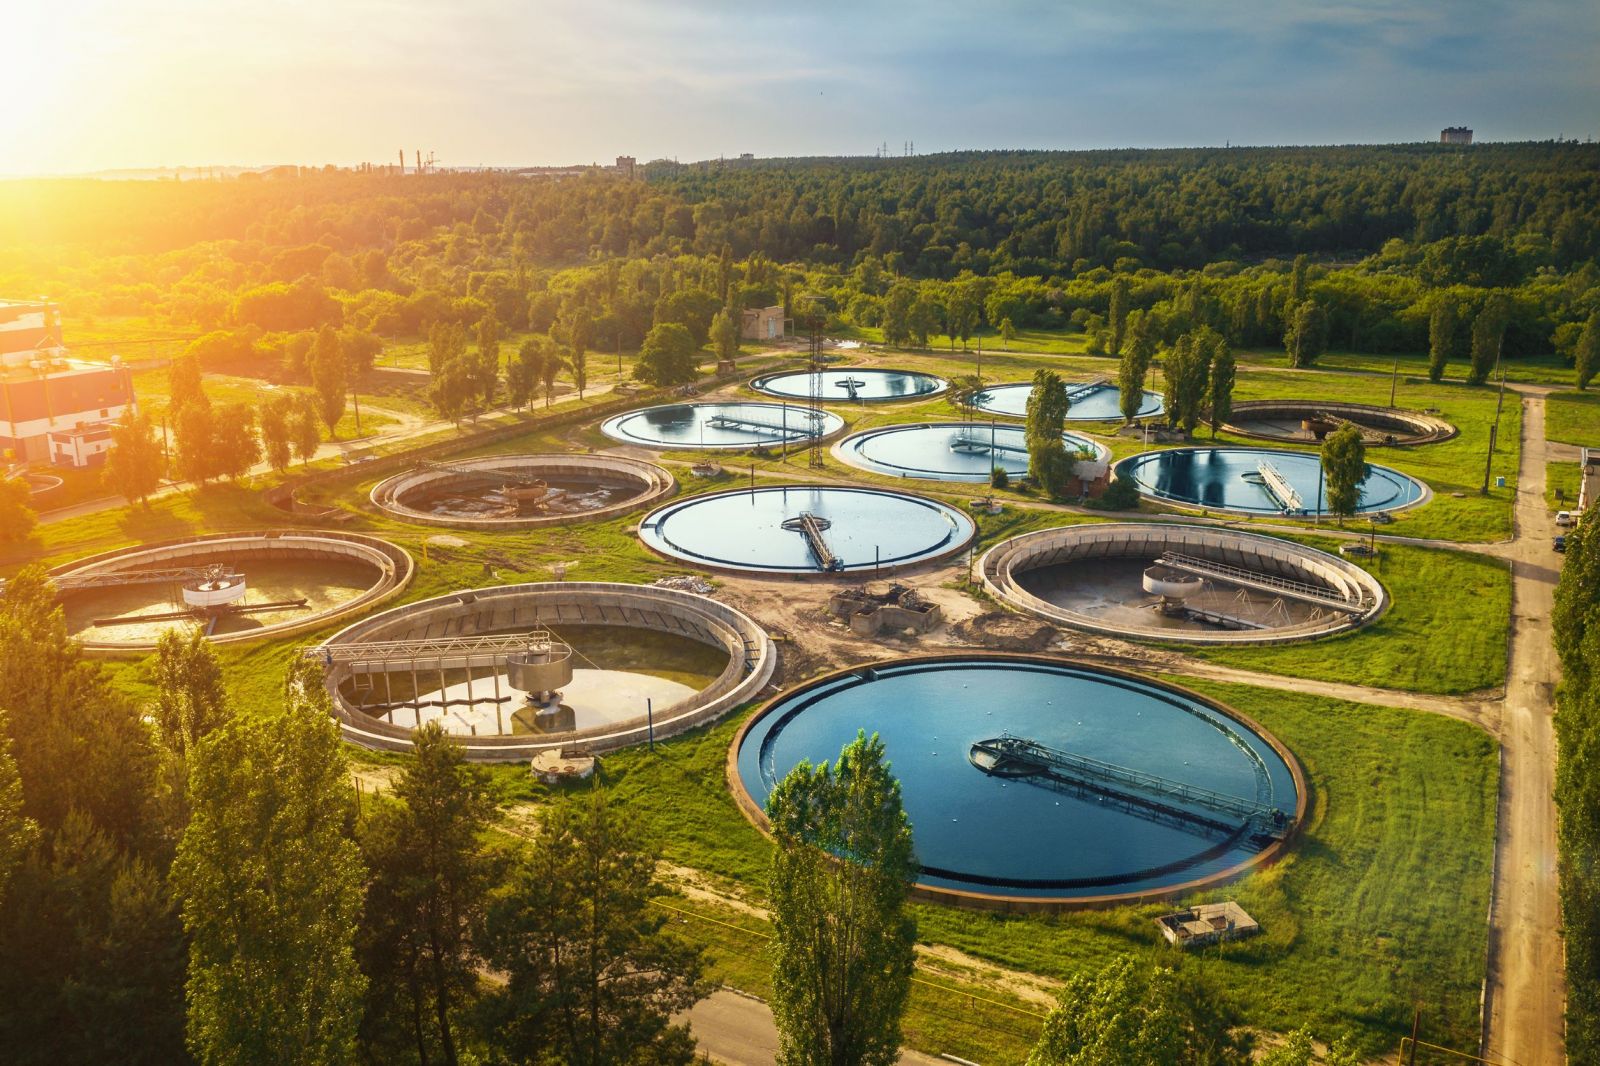 Circular Ways - Promoting circular approaches in wastewater treatment